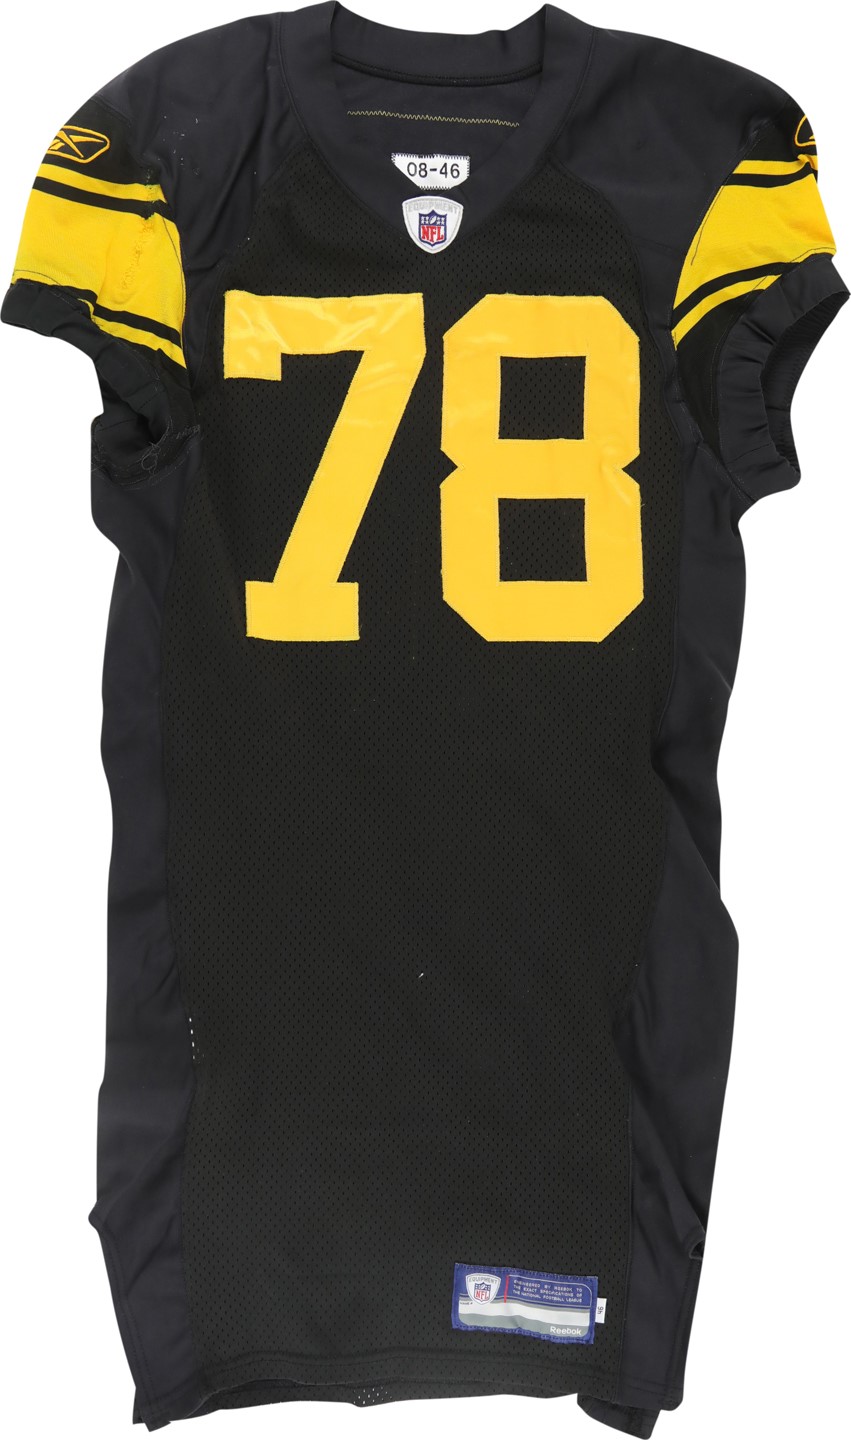 The Pittsburgh Steelers Game Worn Jersey Archive - 2011 Max Starks Pittsburgh Steelers Game Worn Jersey (Photo-Matched)